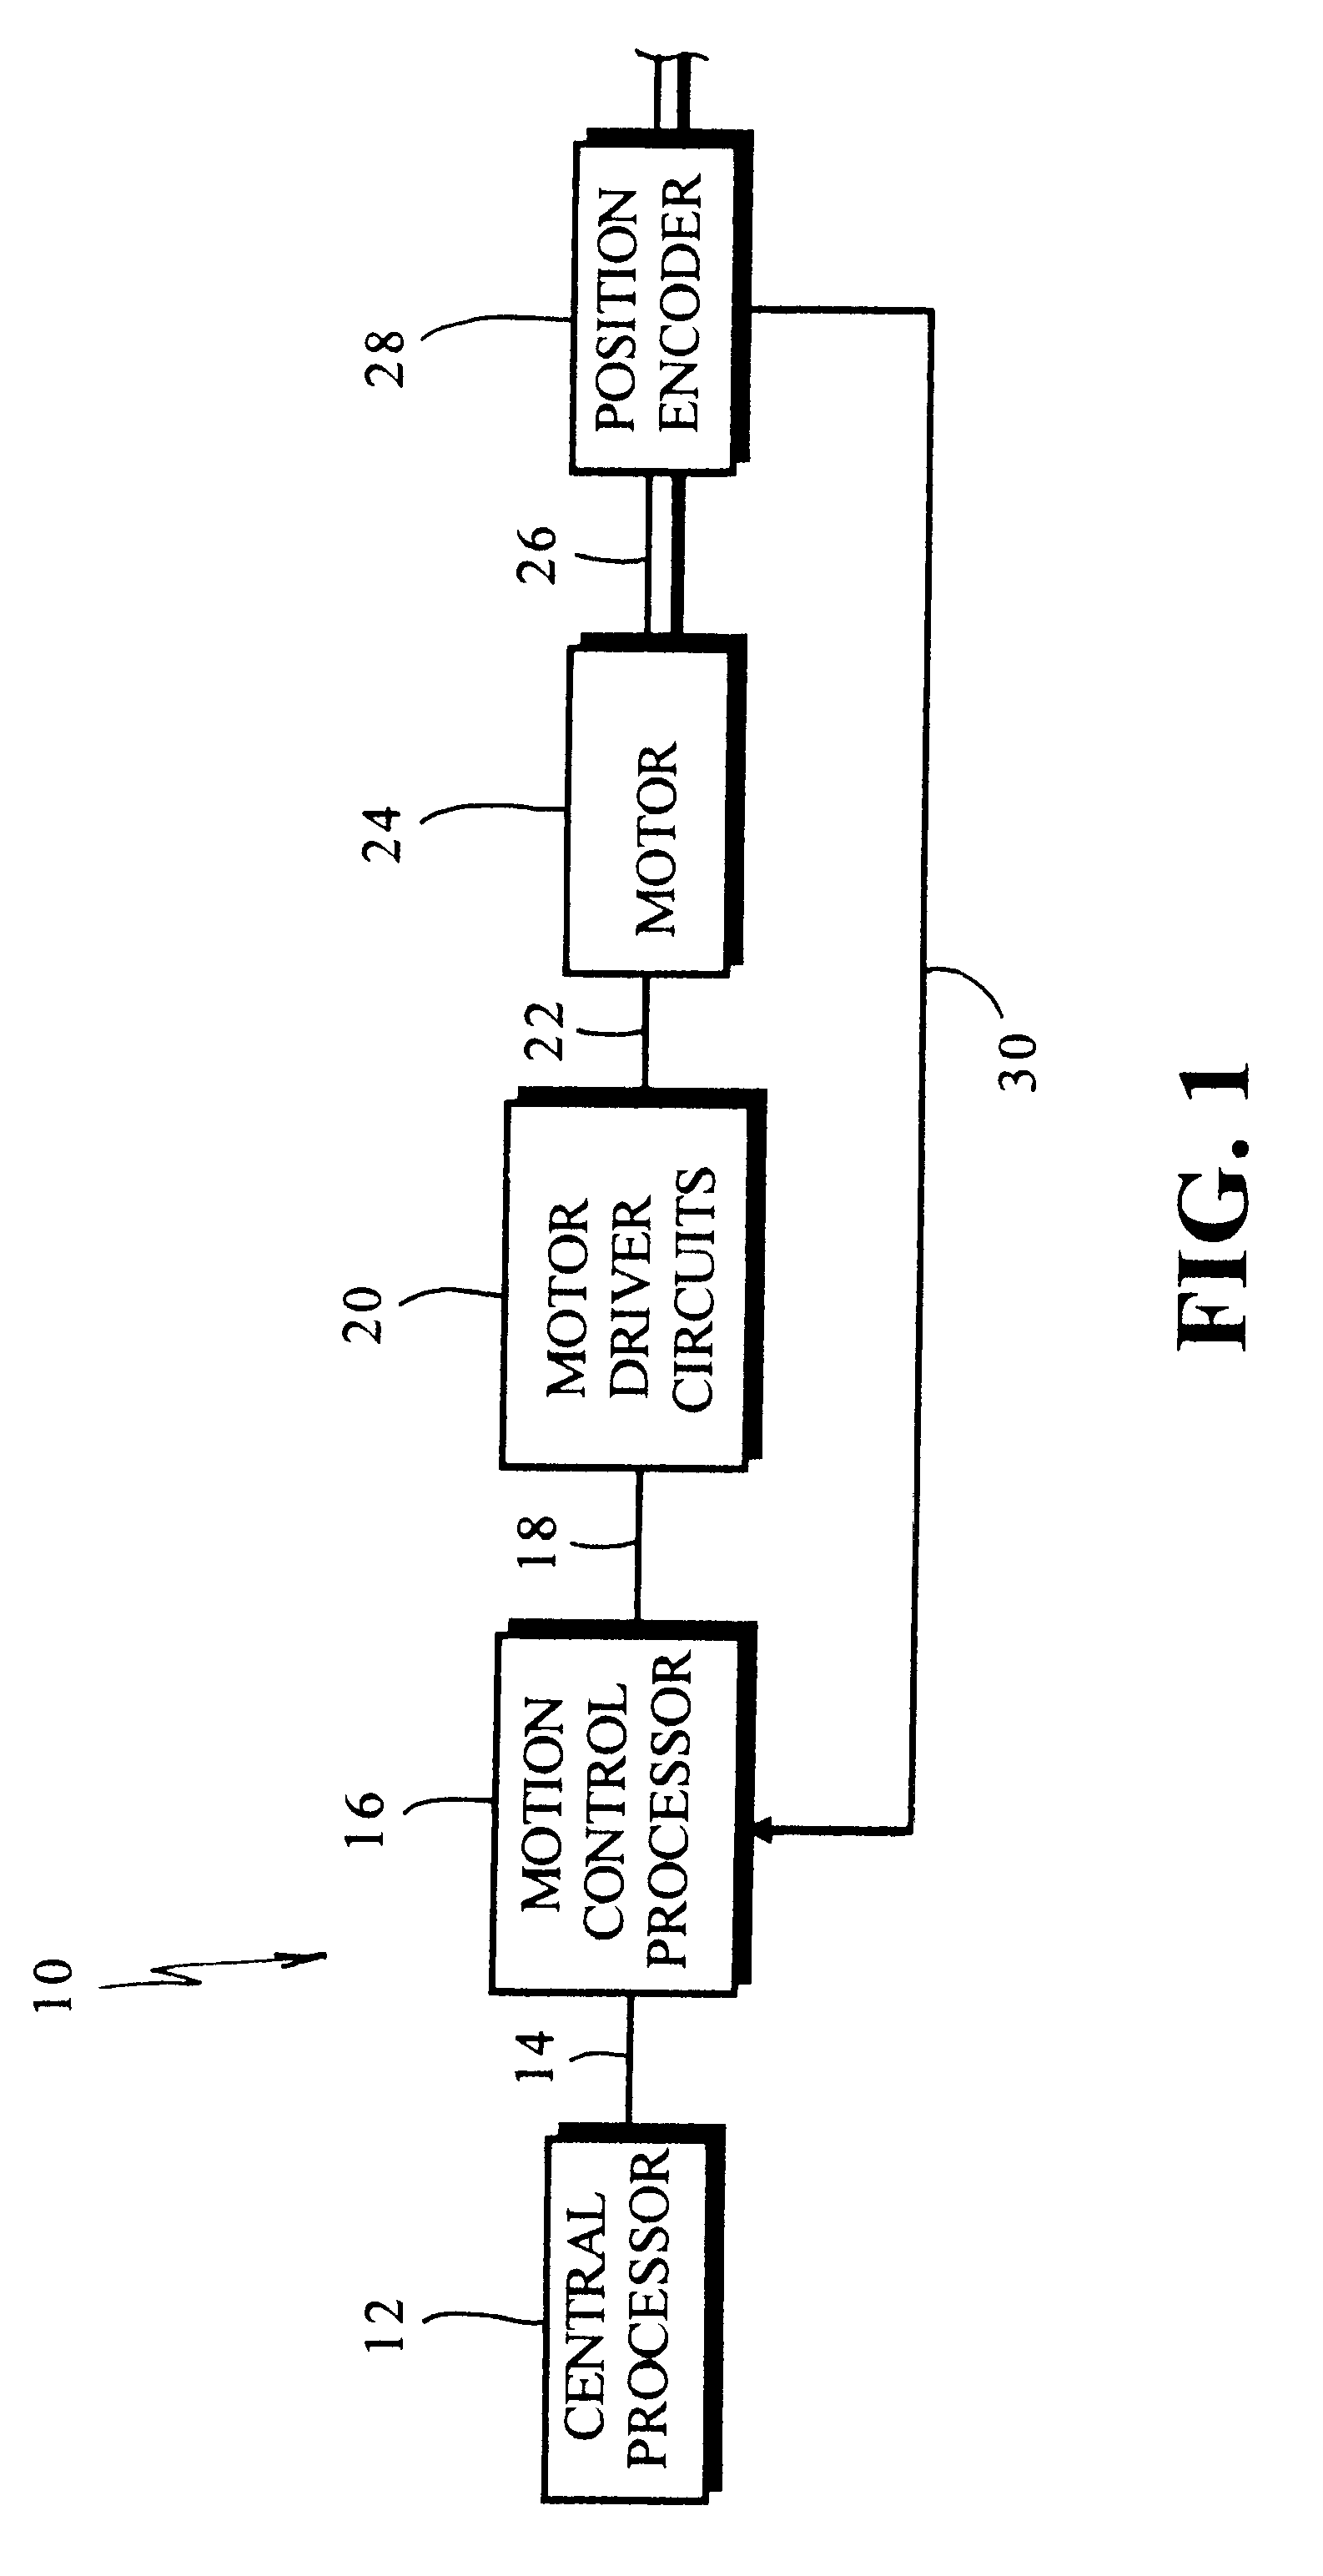 System for detection of obstructions in a motorized door system